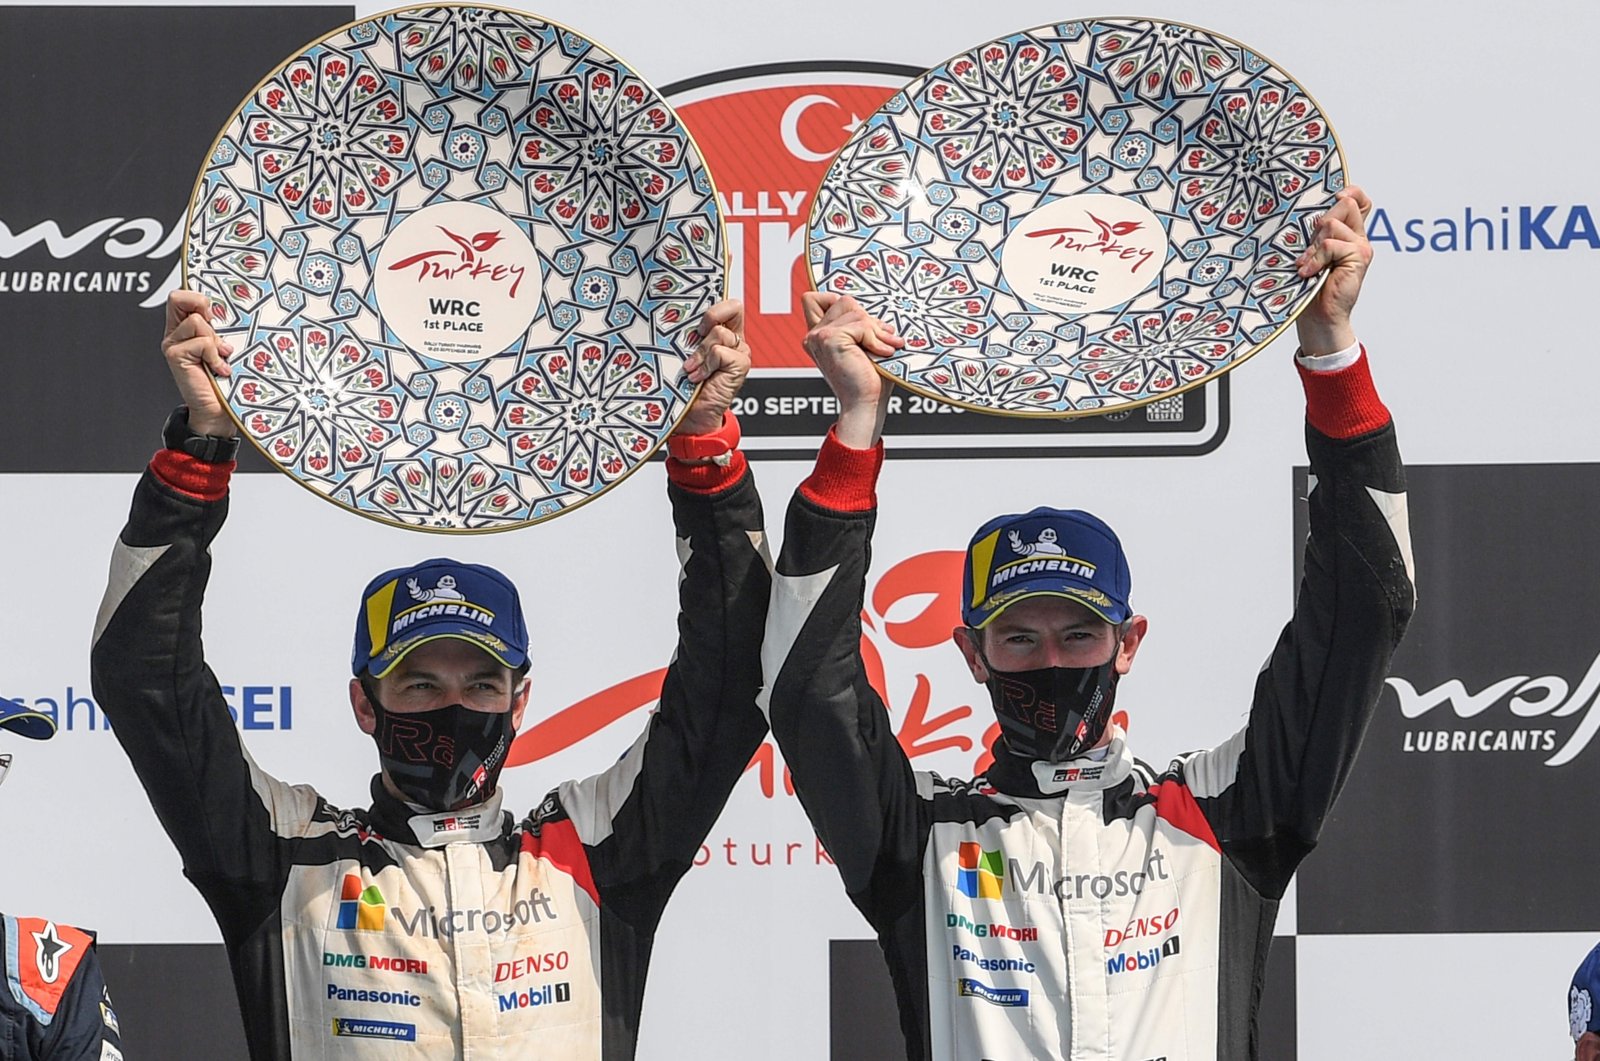 Elfyn Evans (R) and co-driver Scott Martin (L) celebrate their victory during the podium ceremony for the Turkish stage of the 2020 FIA World Rally Championship, in Muğla, Turkey, Sept. 20, 2020. (AFP Photo)